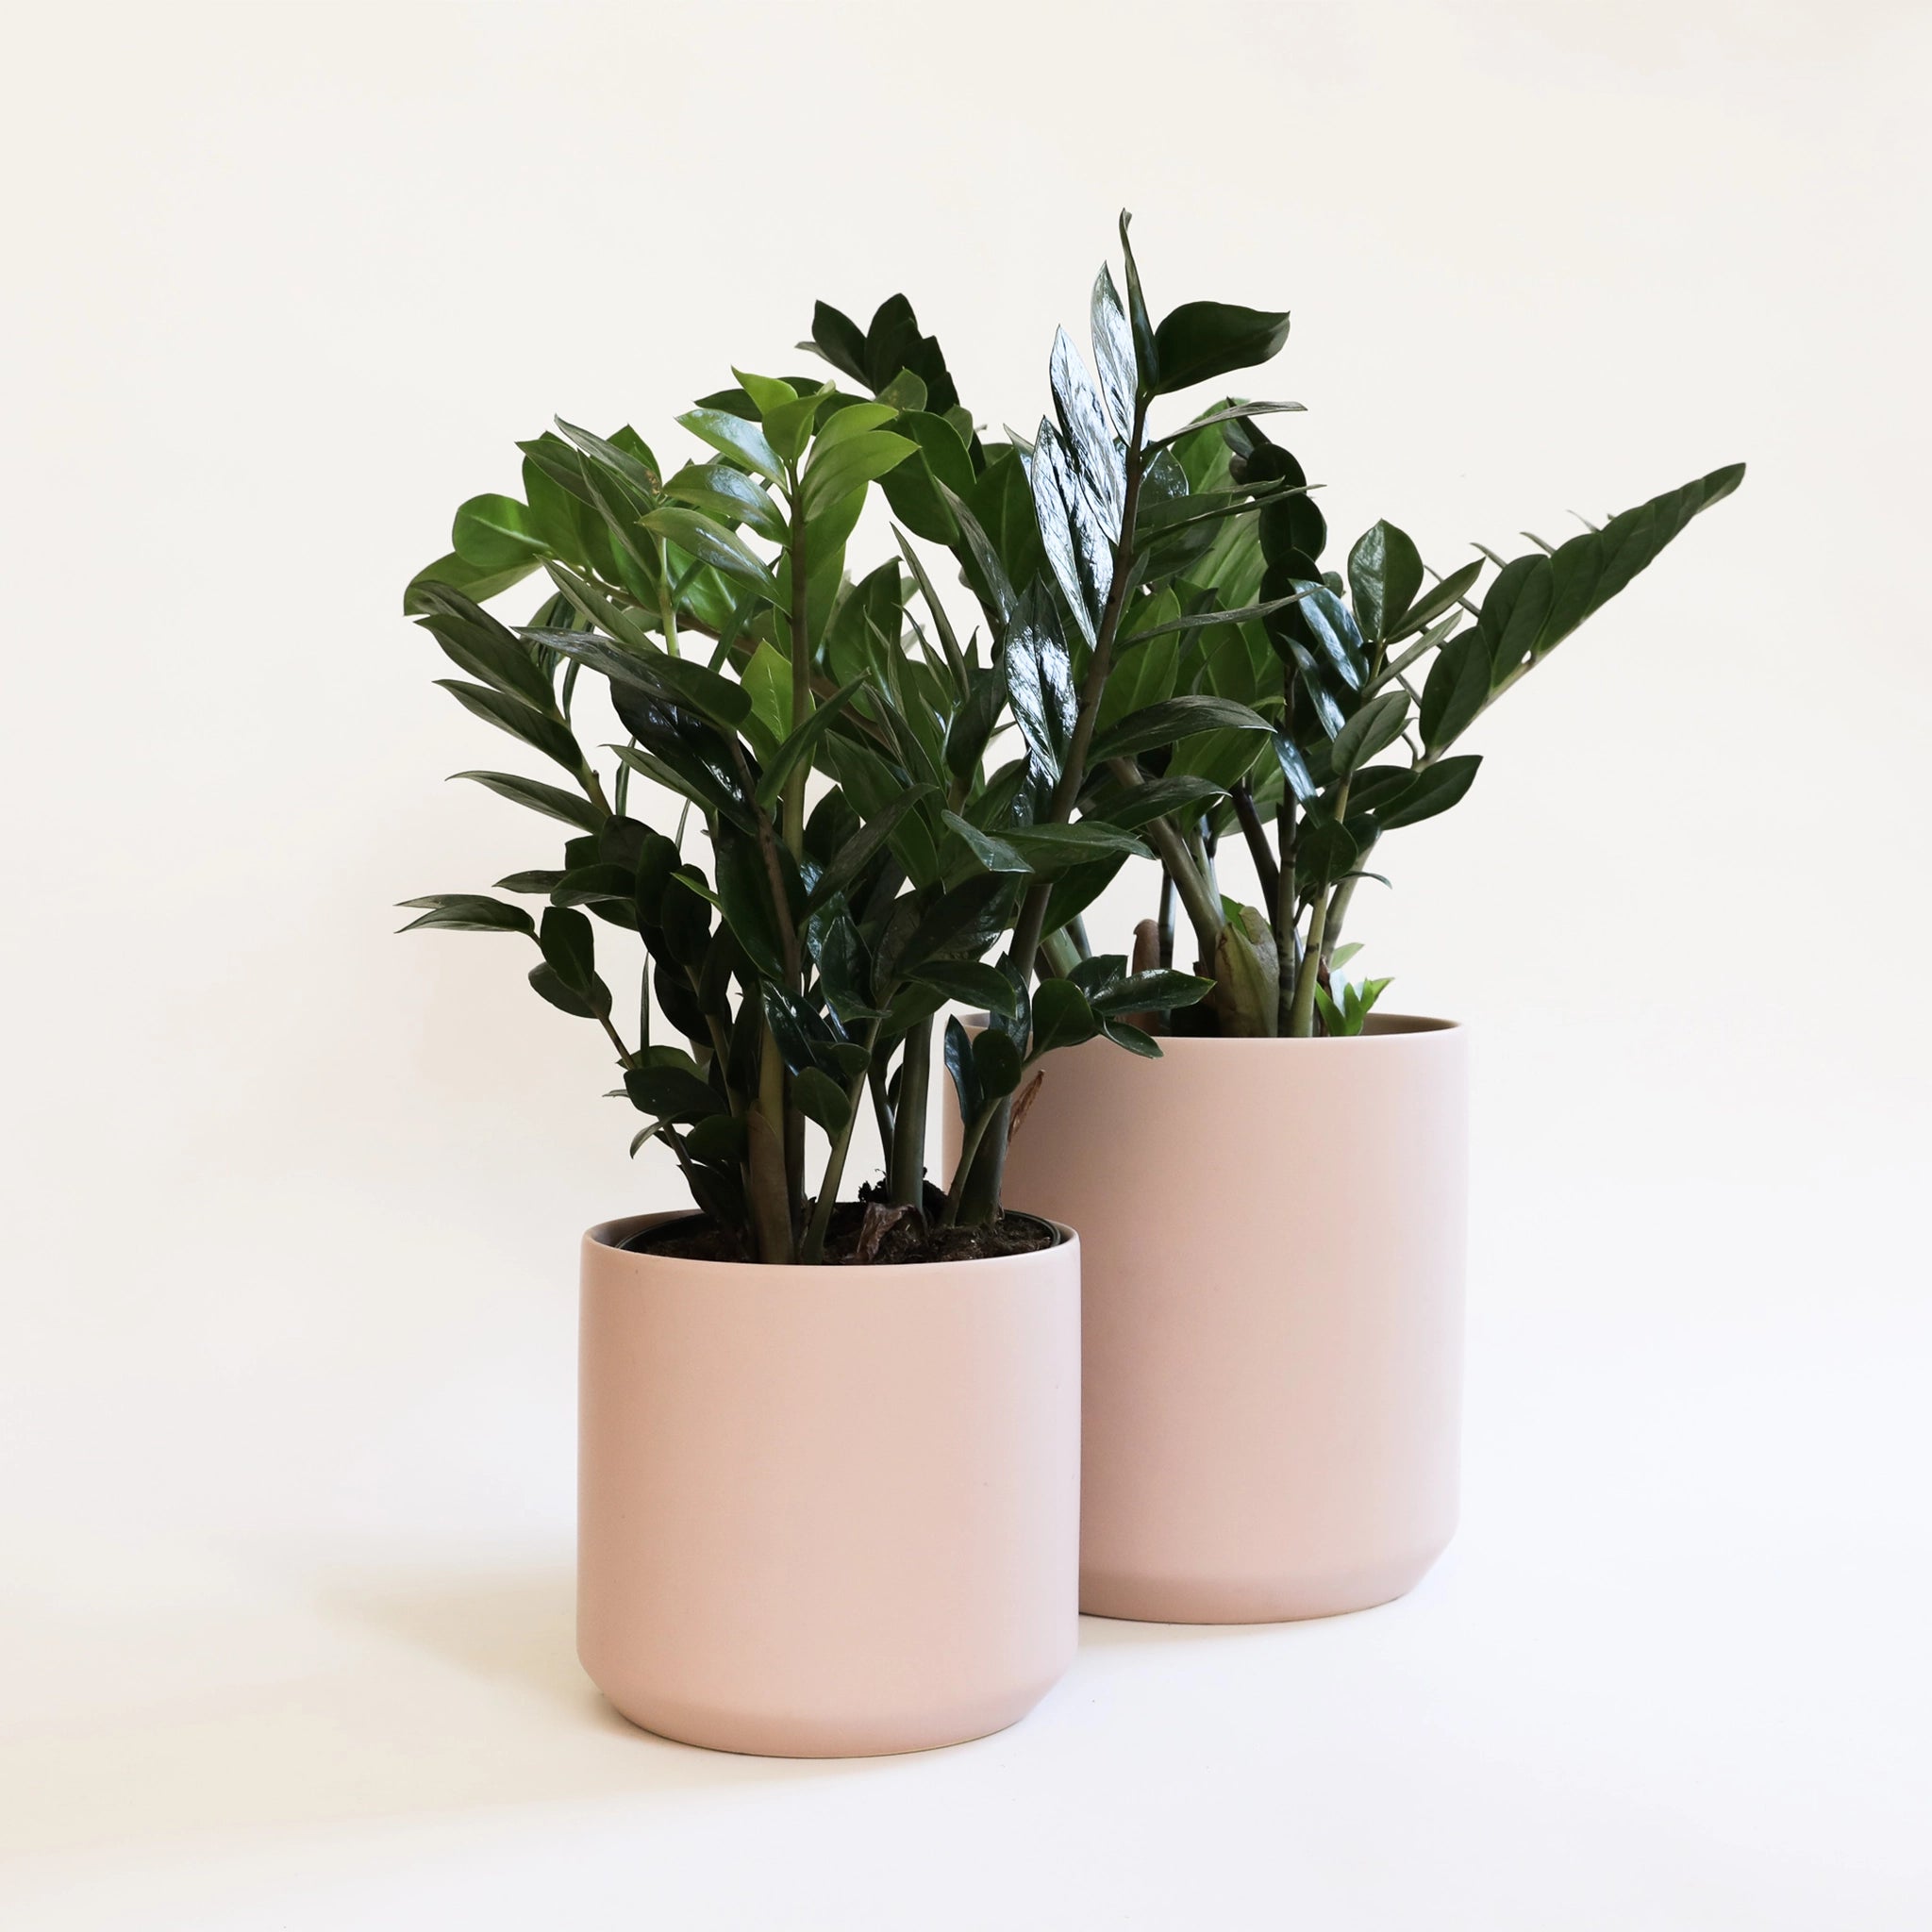 On a cream background is two different sized light pink ceramic planter with a plant inside that is not included.  